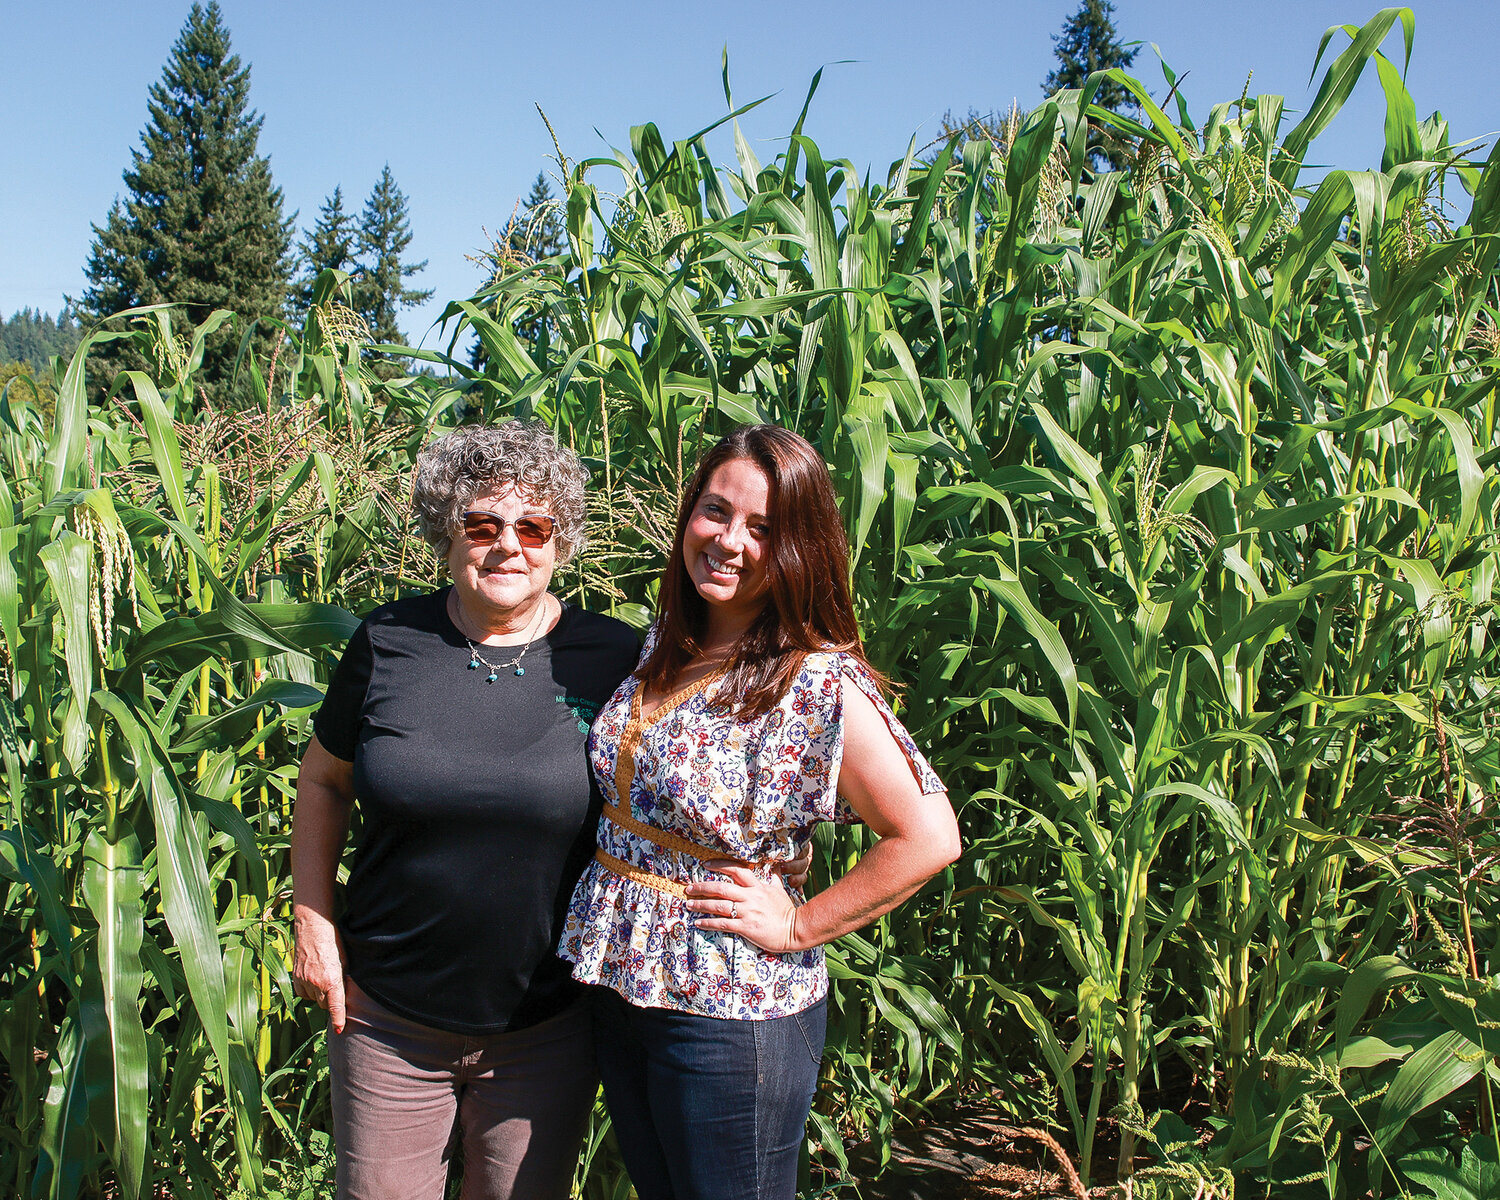 The owners of Mindful Creations LLC, Judy Canter, left, and Diana Peterson stand amid corn in their produce field on Sept. 6